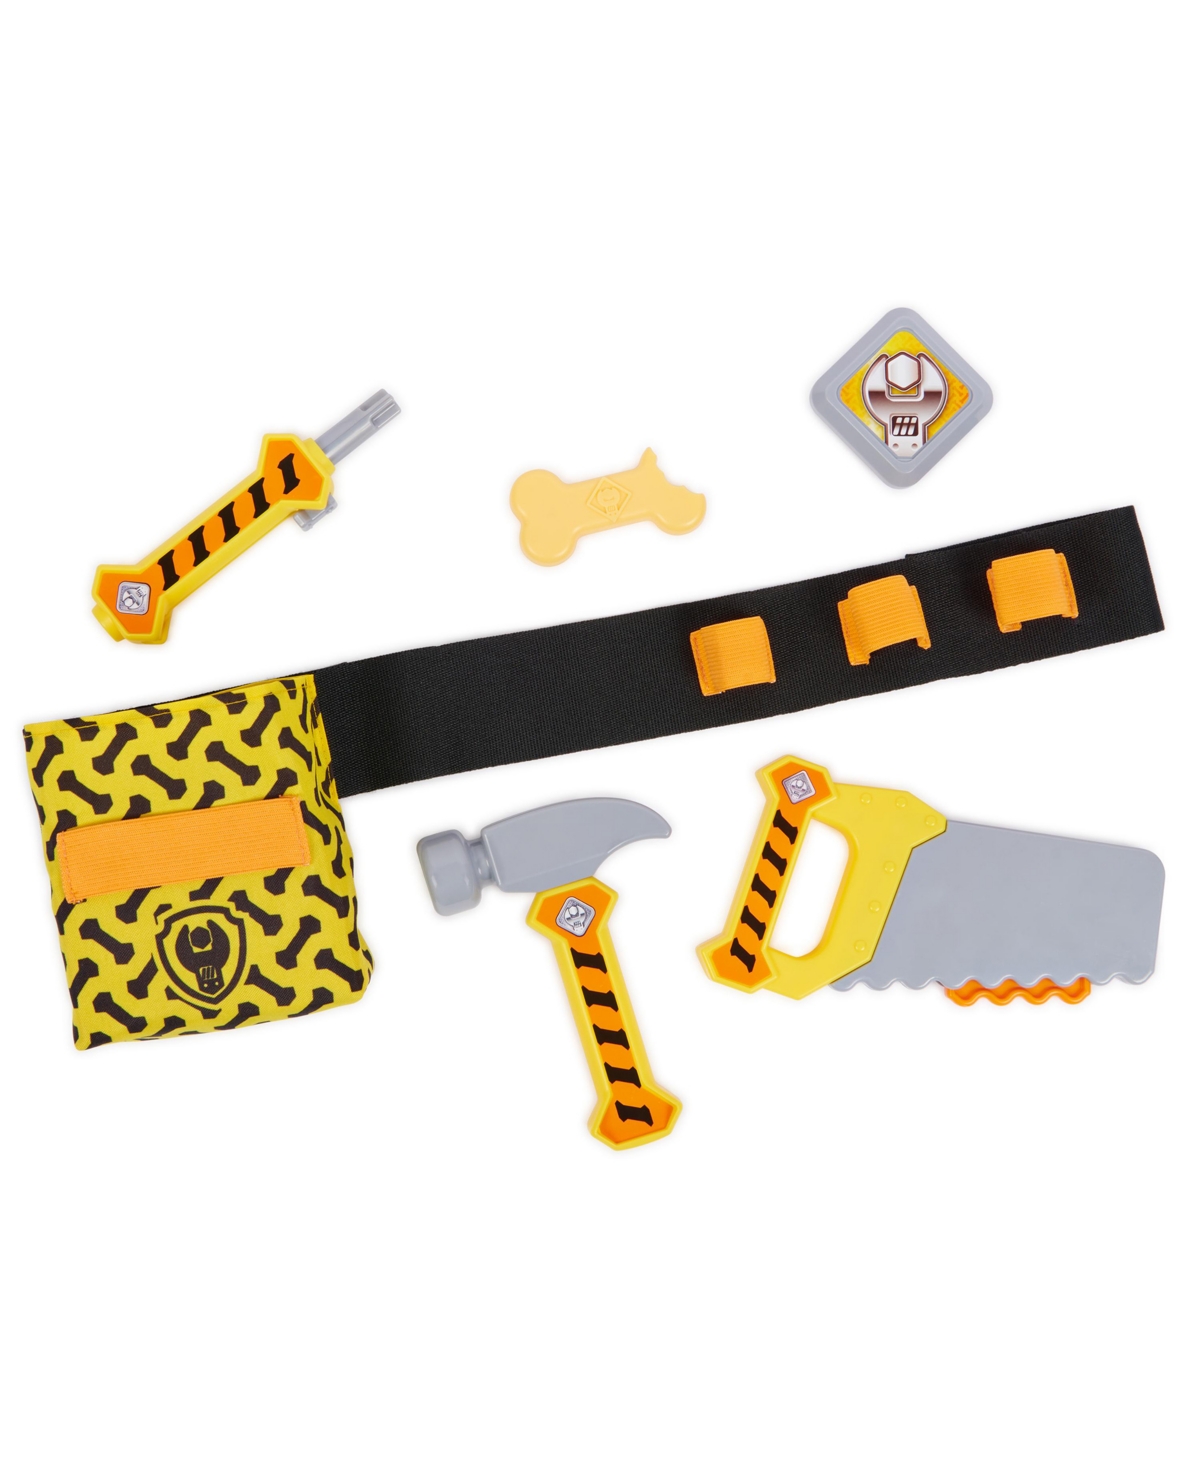 Rubble & Crew , Rubble's Construction Tool Belt, With 6 Piece Kids Tool Set In Multi-color